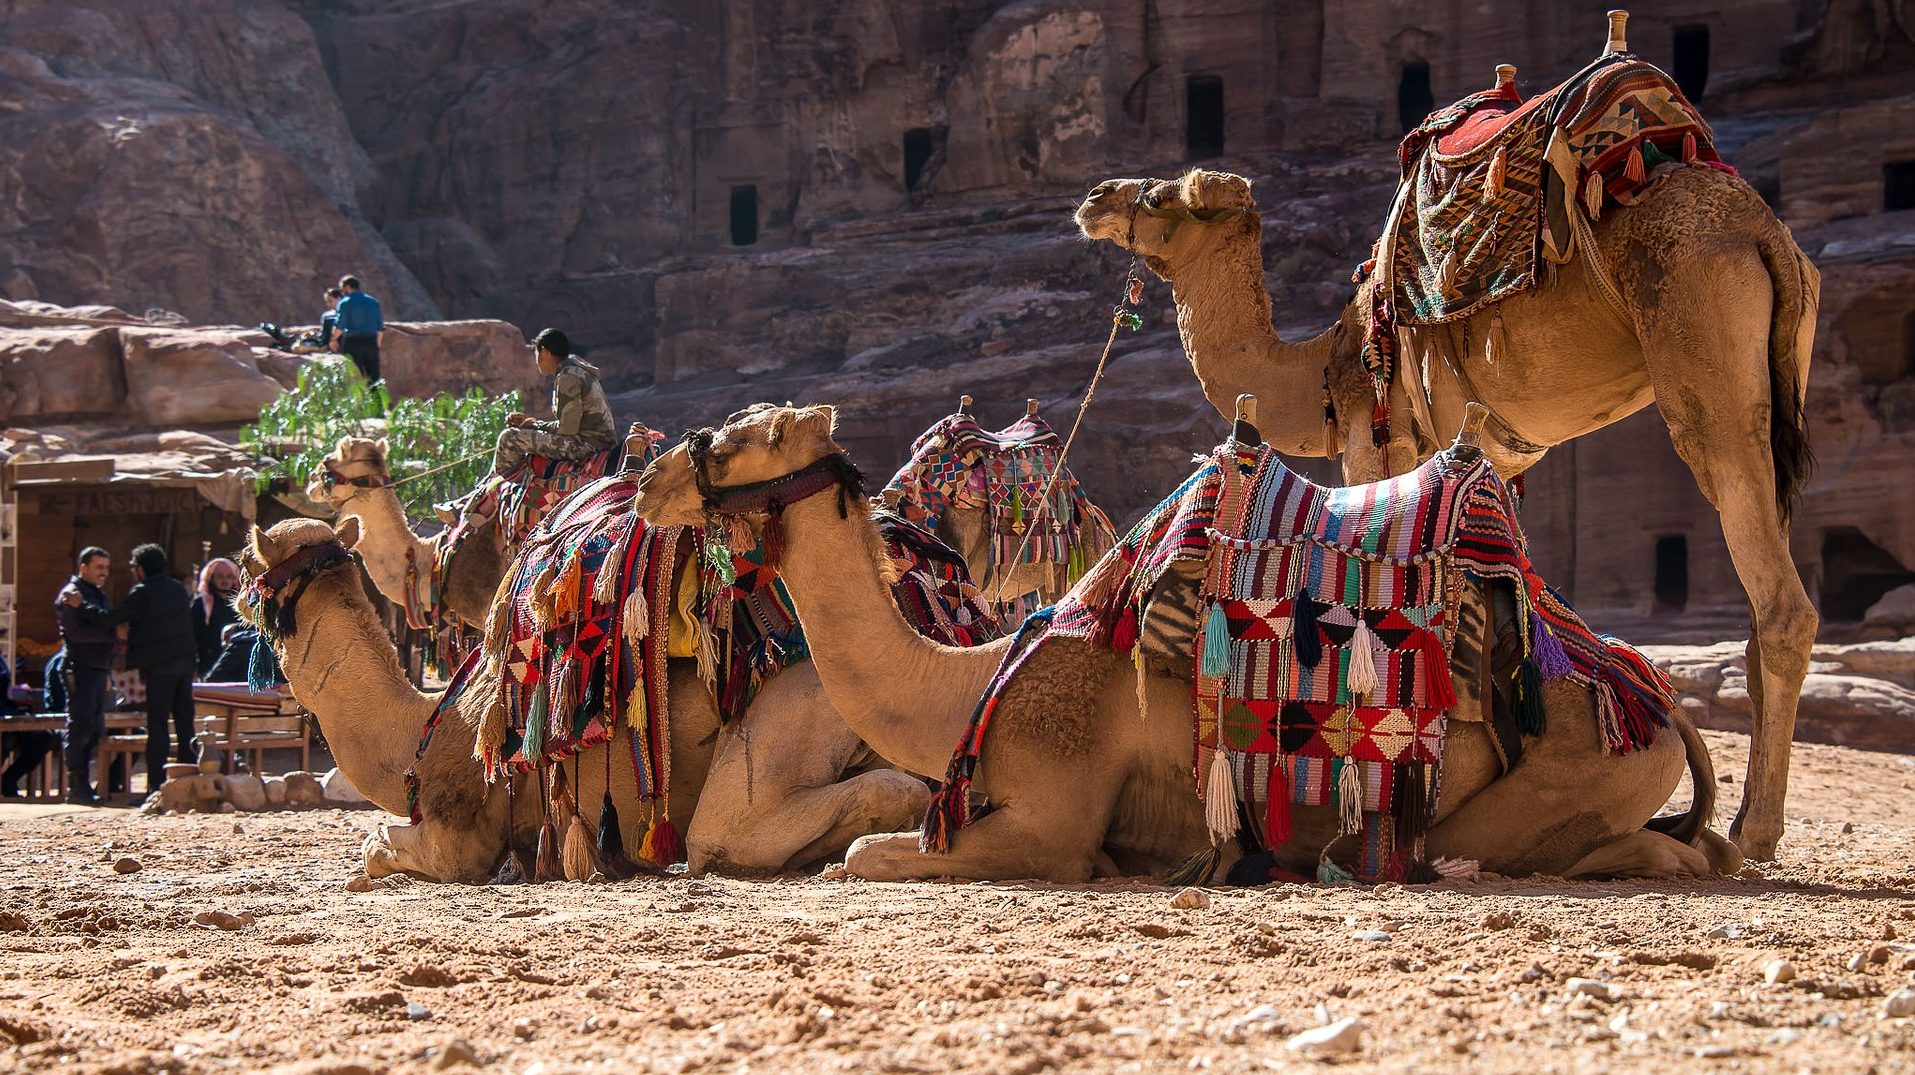 World’s Largest Camel Festival Is Coming to Saudi Arabia